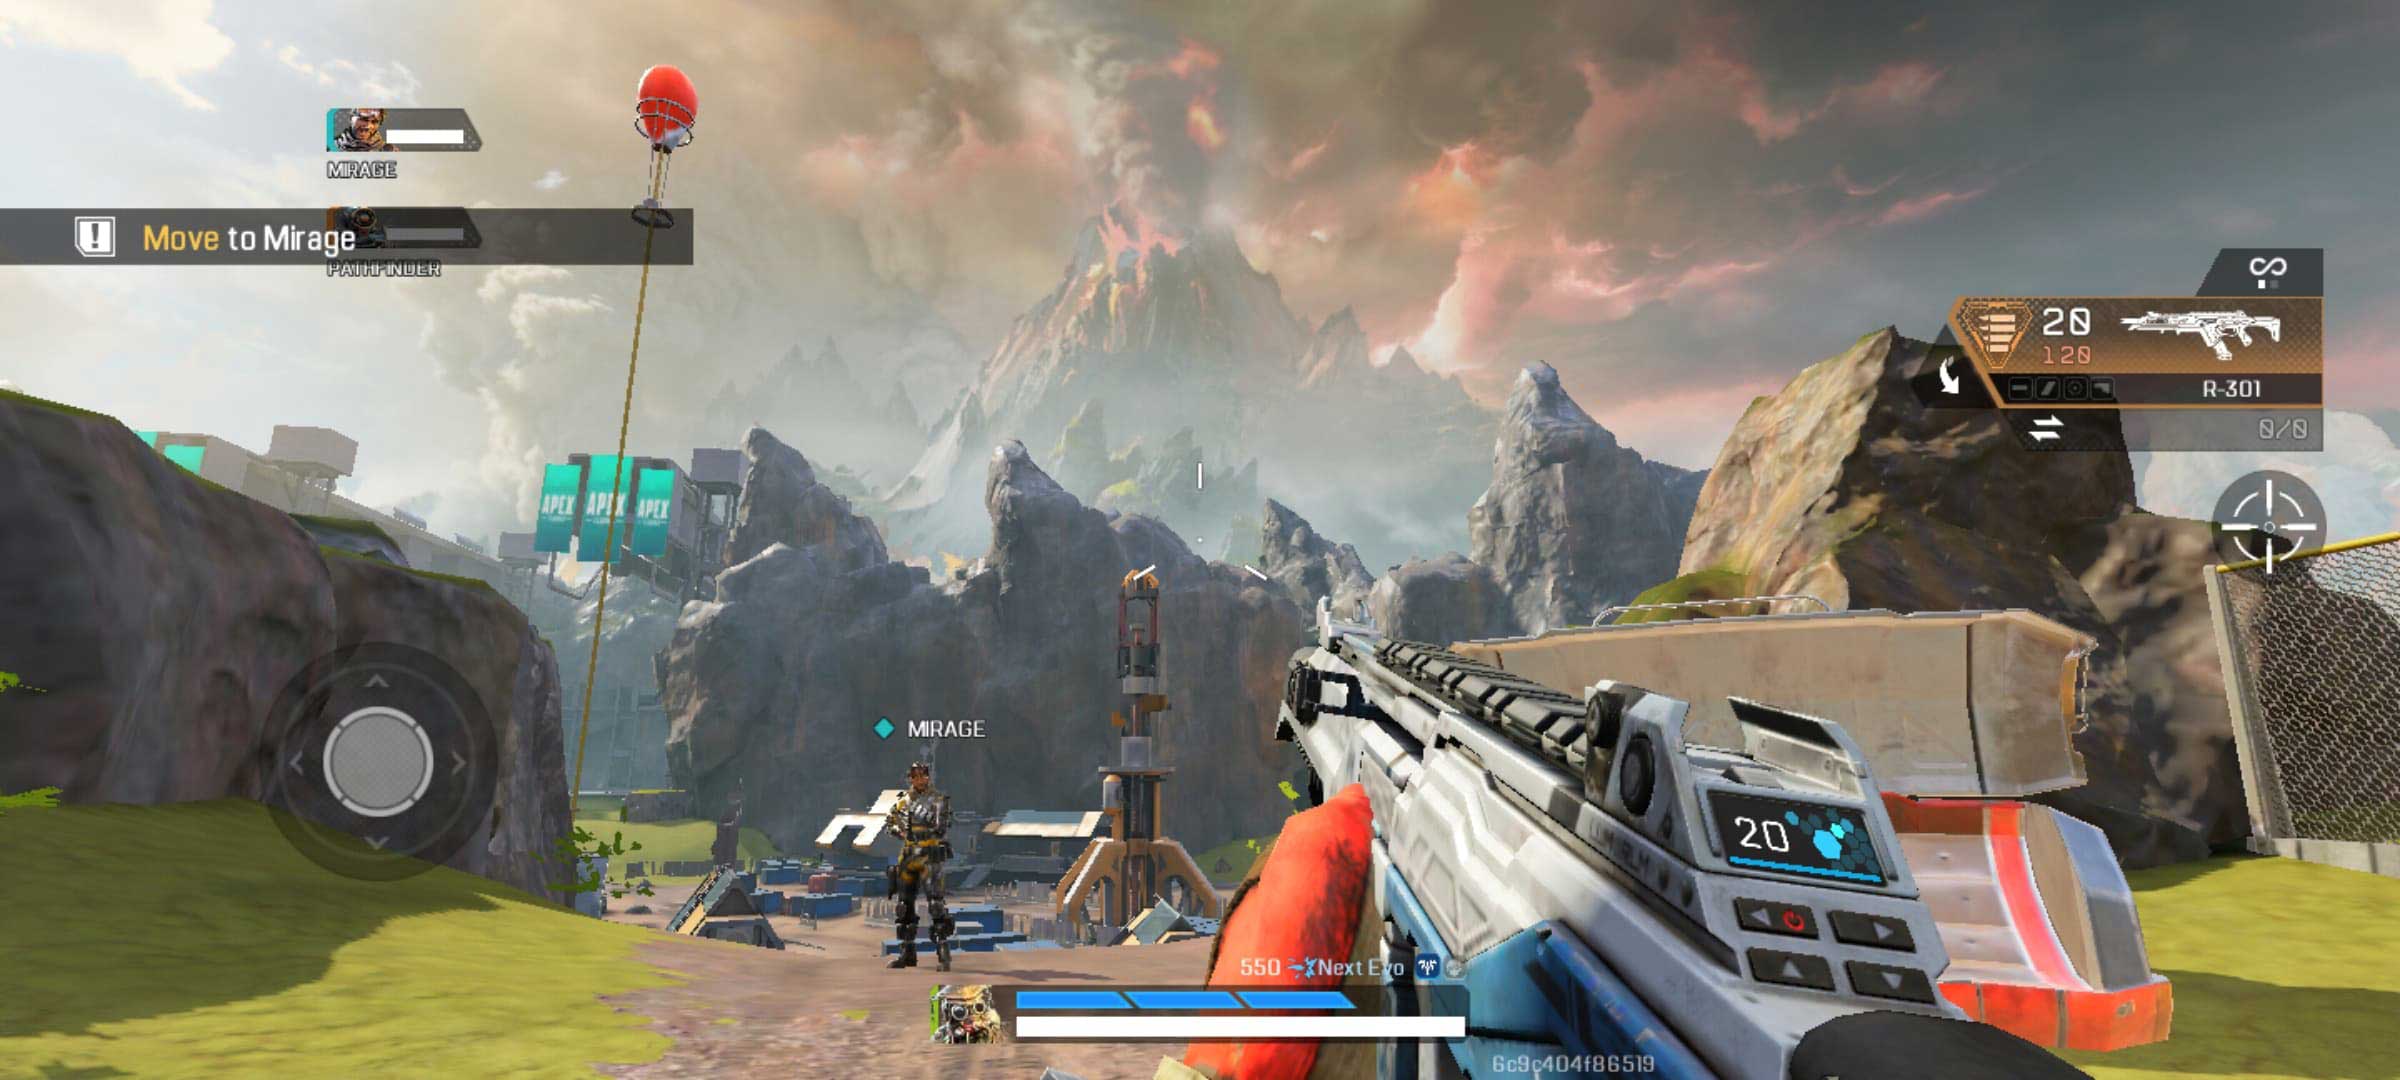 Apex Legends Mobile is great for playing on the go